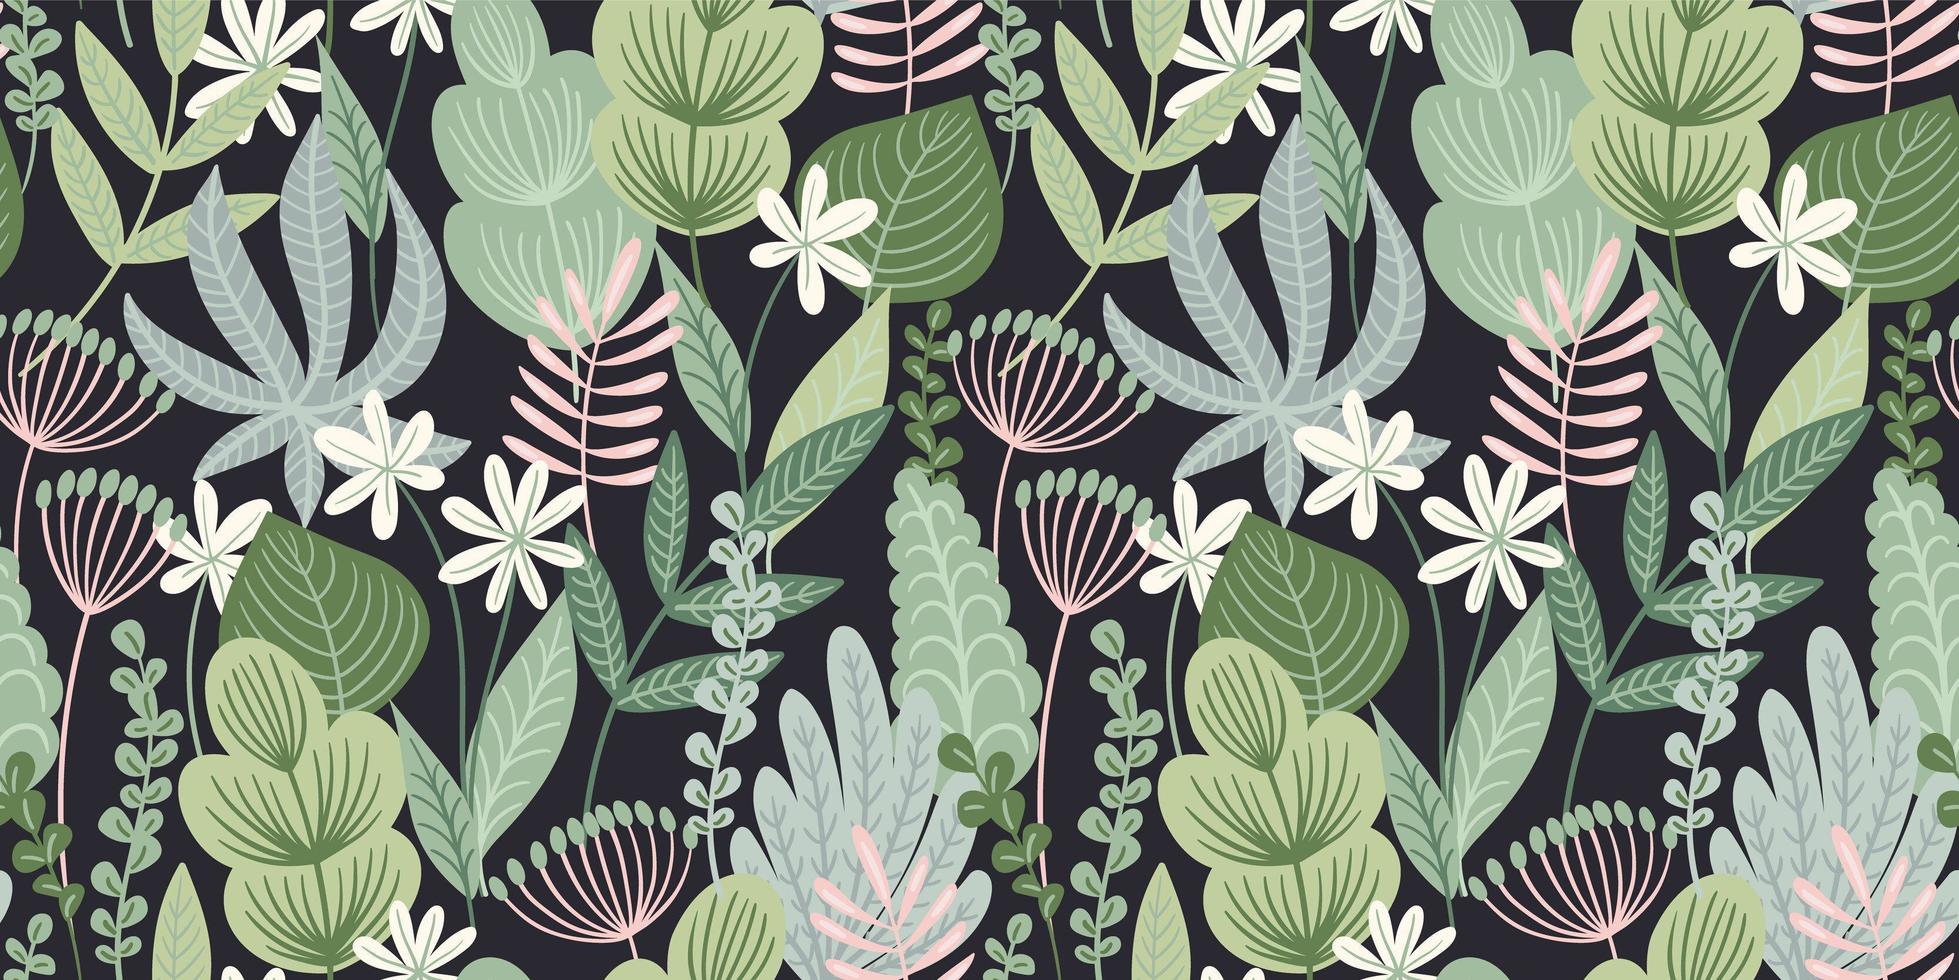 Abstract gentle seamless pattern with leaves, flowers and grass. Modern exotic design vector